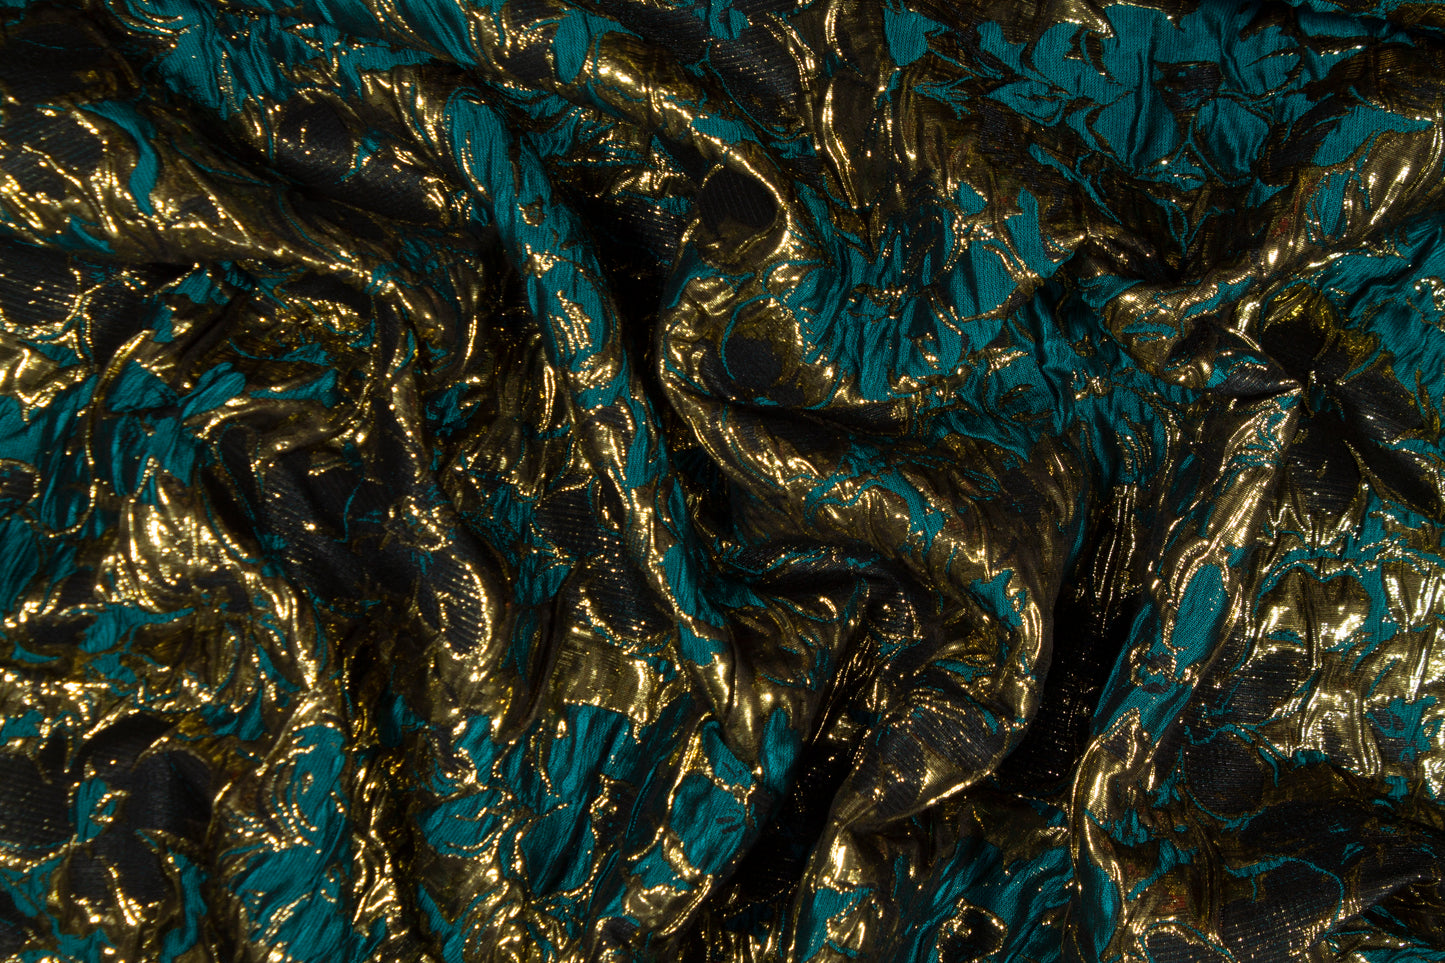 Floral Crushed Metallic Brocade - Teal Green and Gold